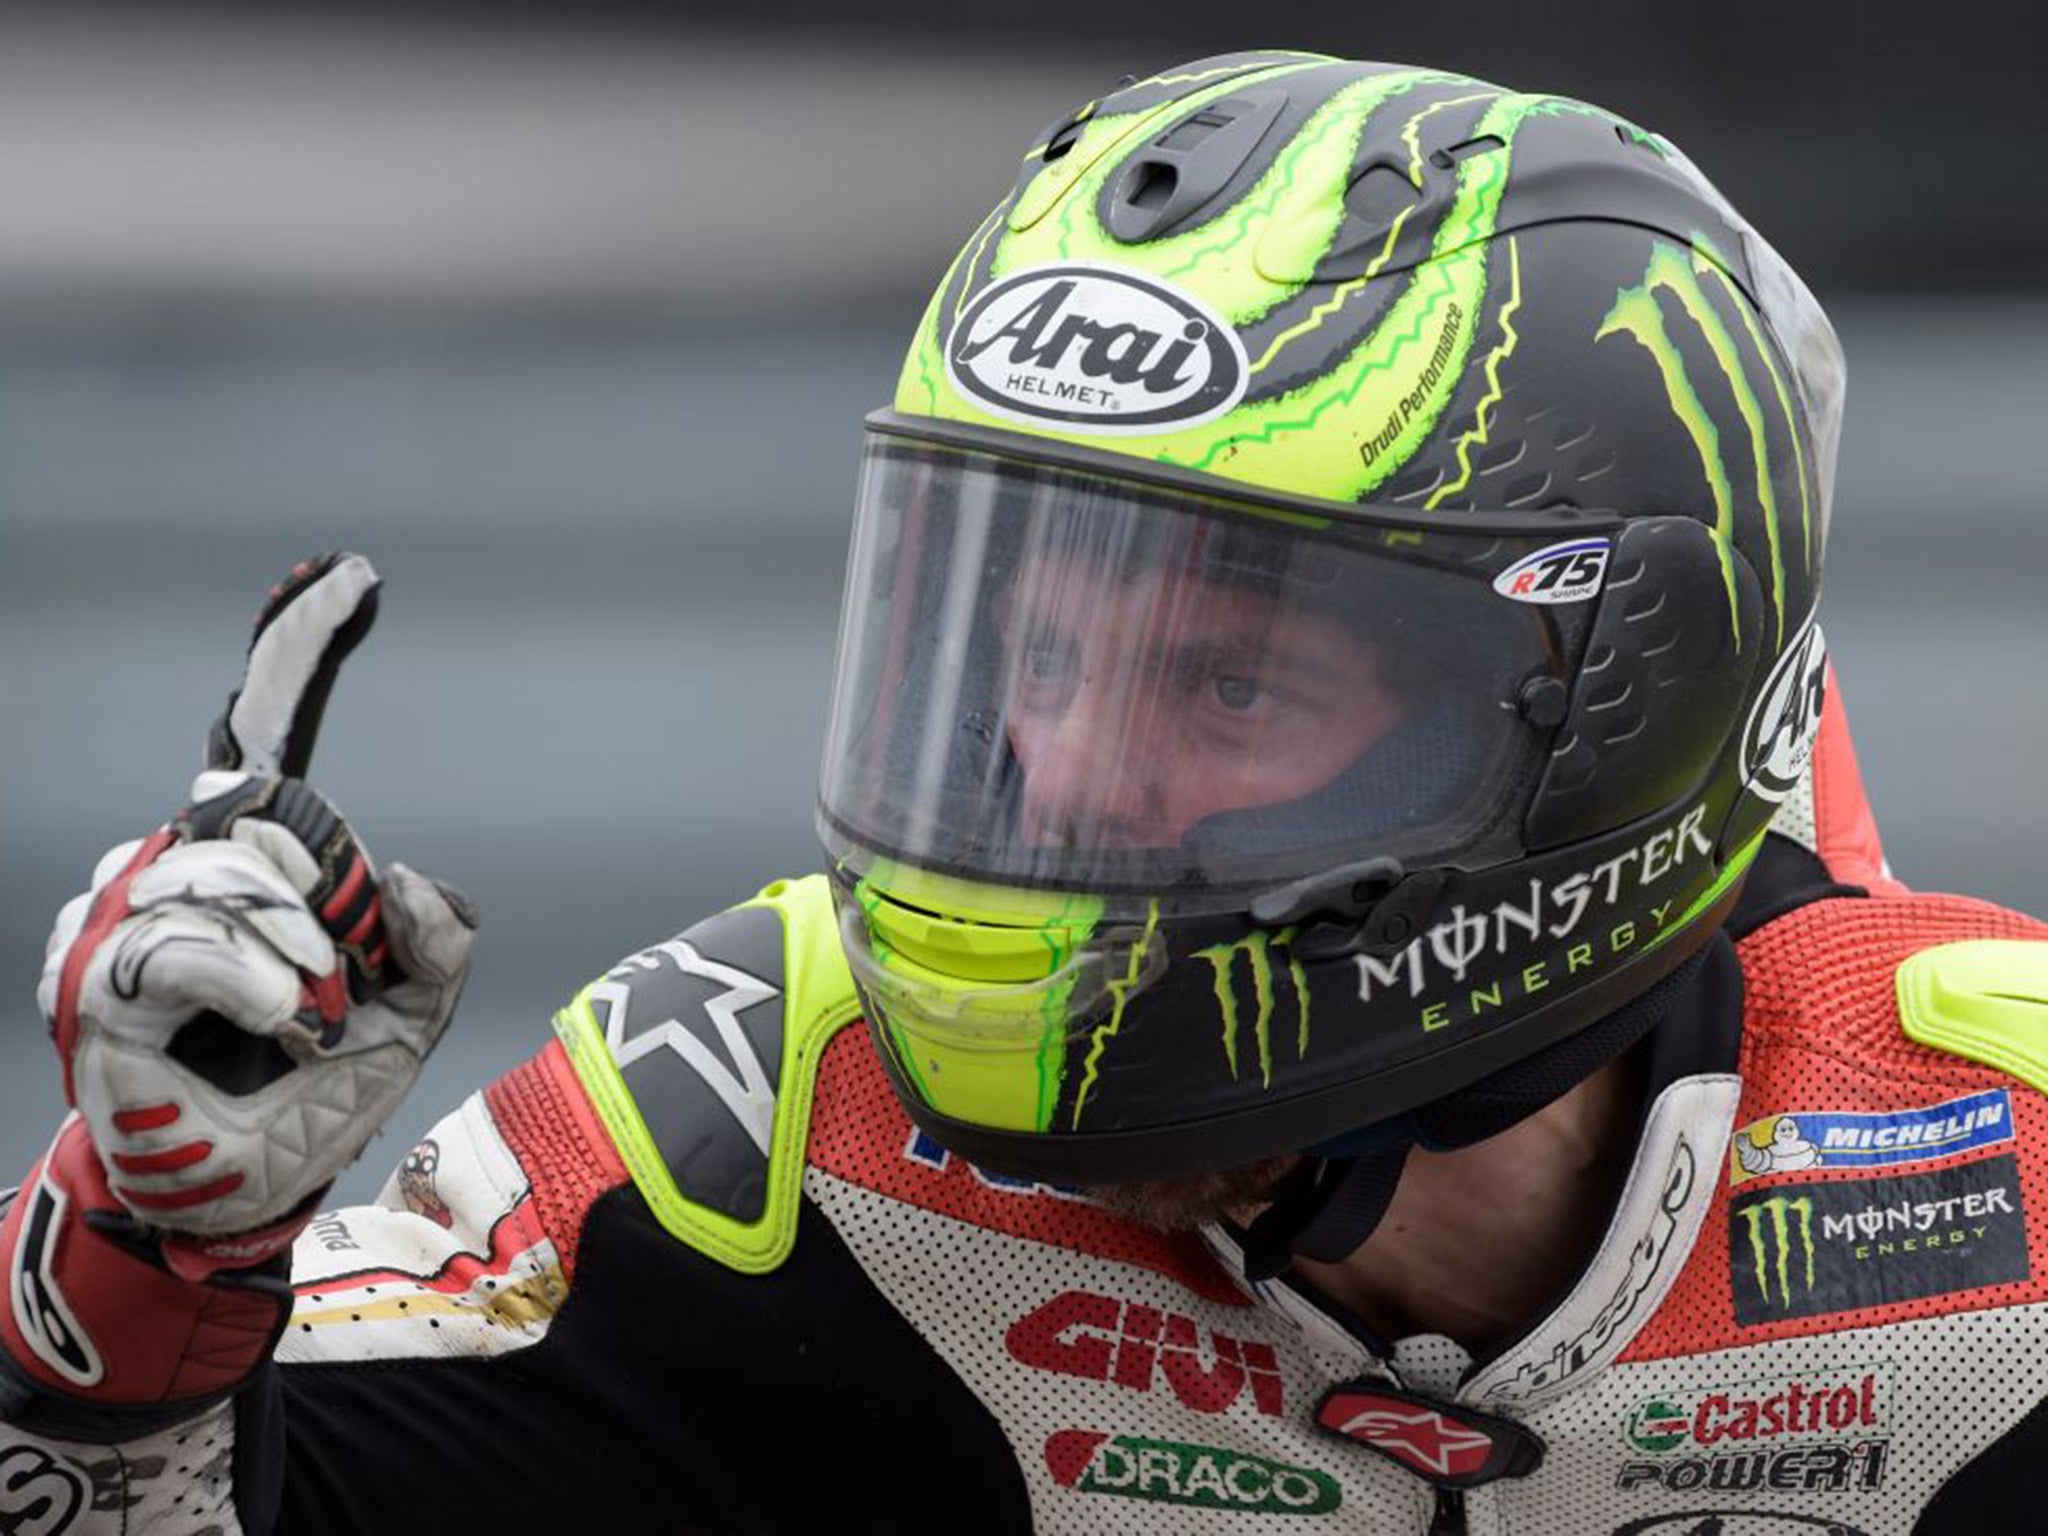 Crutchlow becomes Britain's first MotoGP winner in 35 years